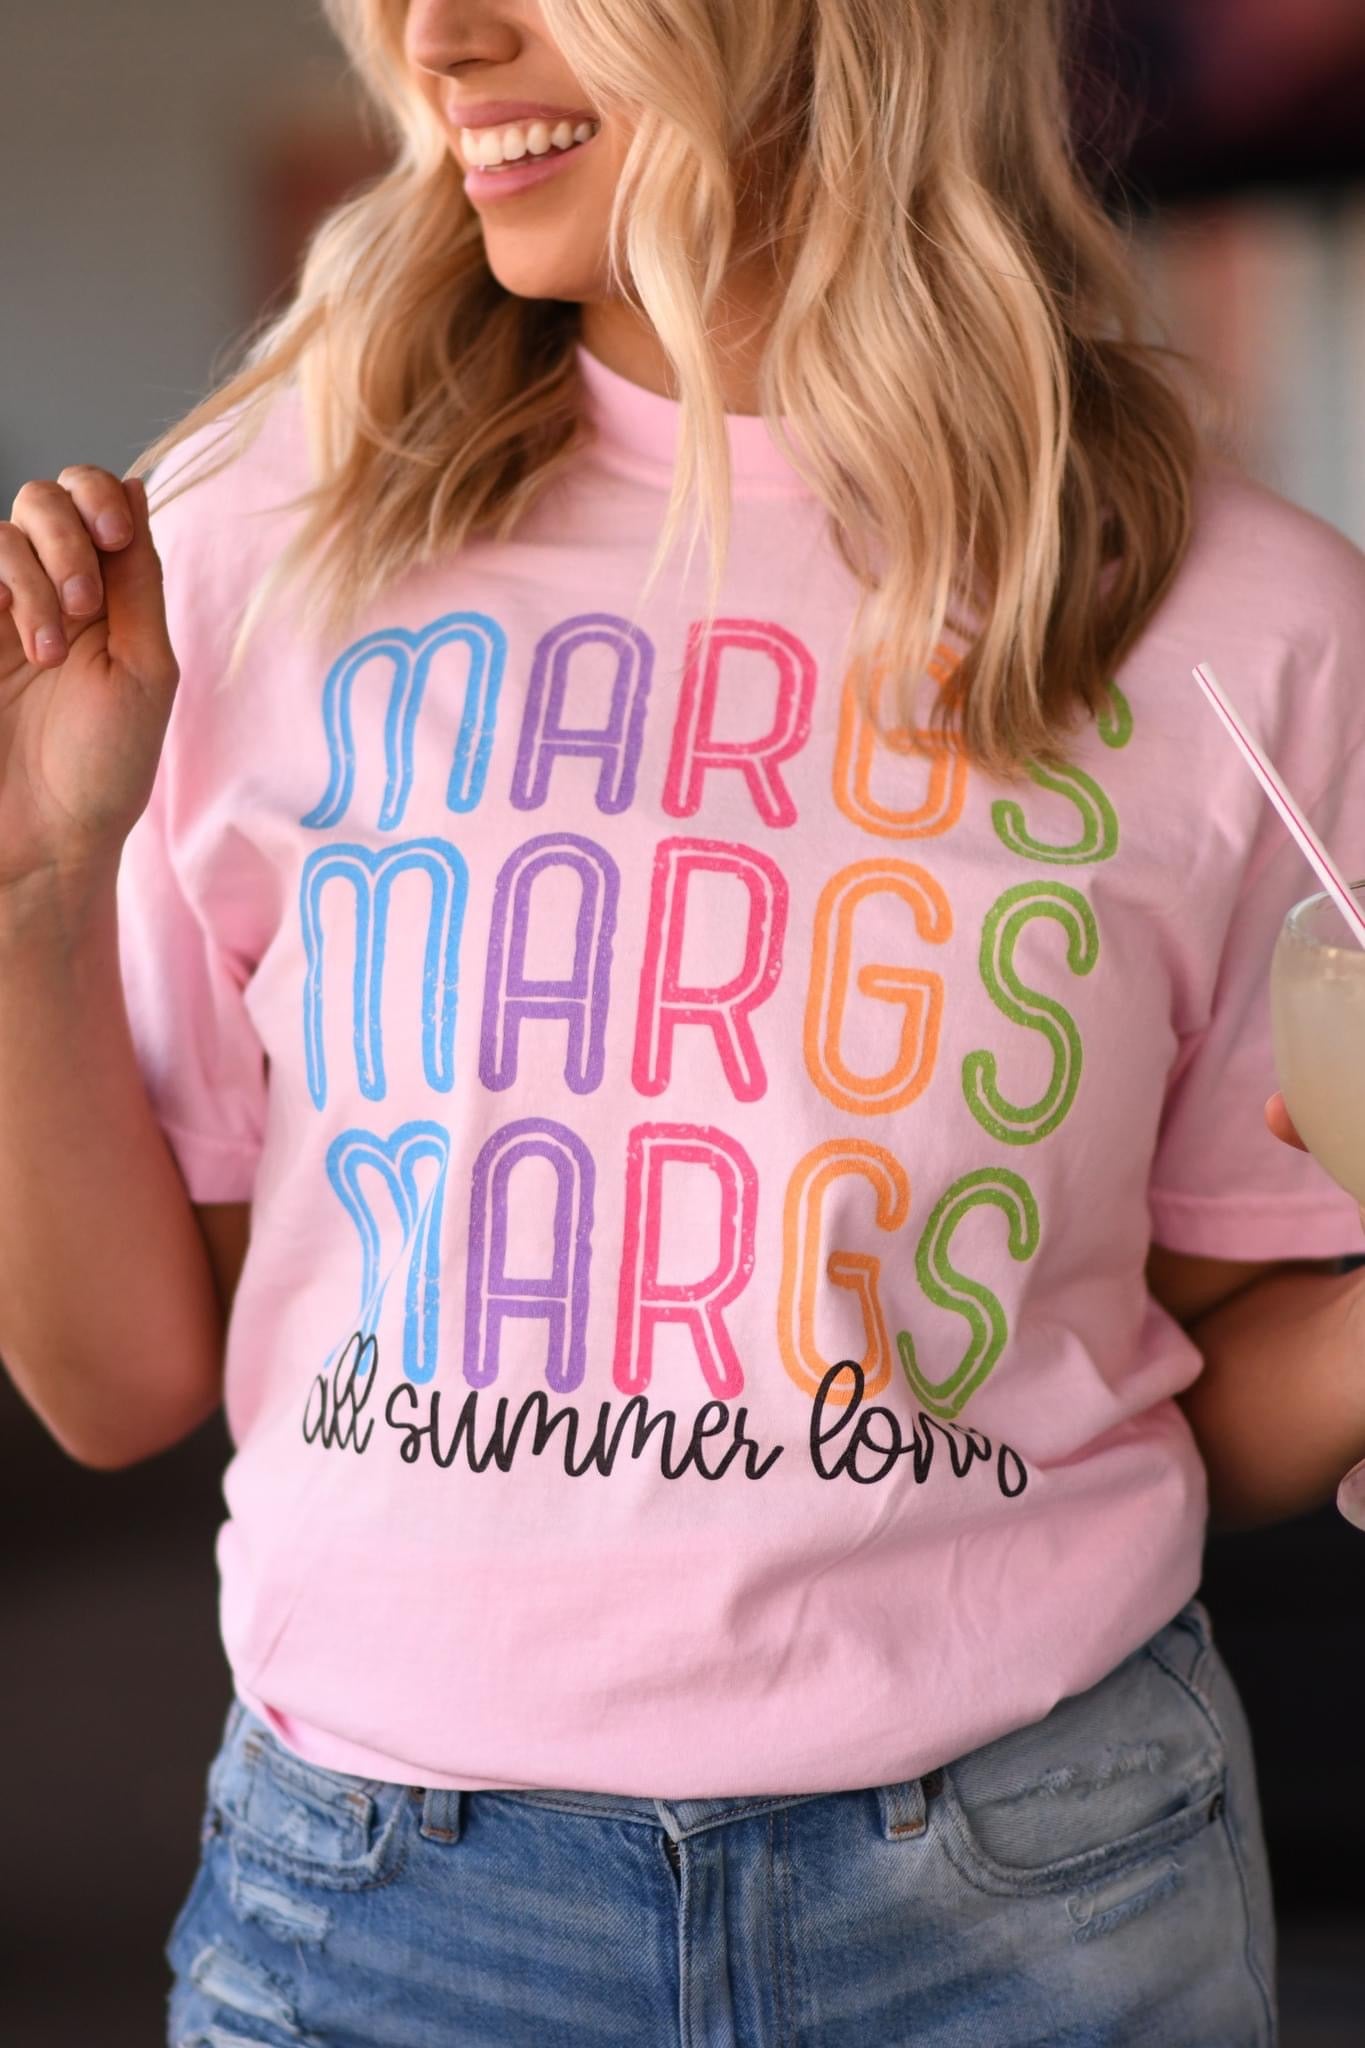 🍹☀️Margs All Summer Long🍹☀️